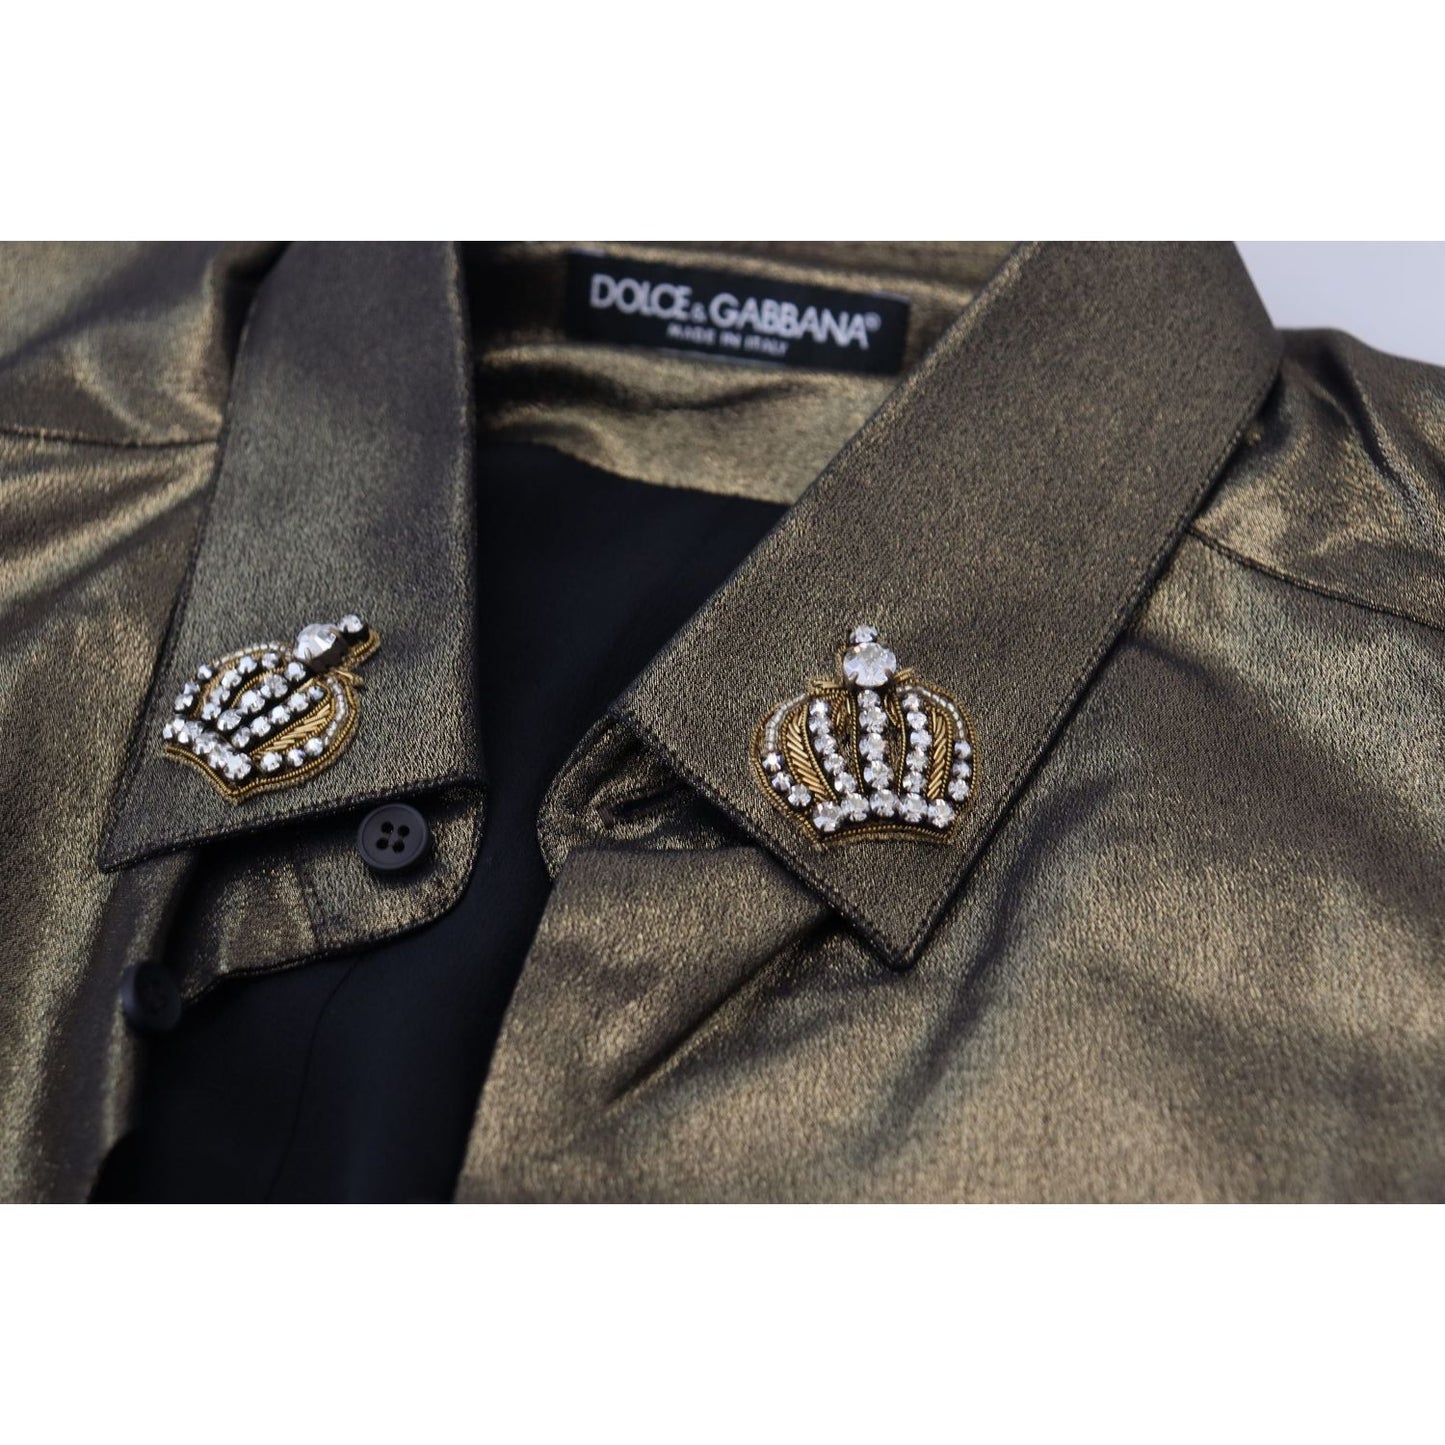 Dolce & Gabbana Elegant Gold Slim Fit Shirt with Crown Embroidery metallic-gold-dg-embroidered-crown-silk-shirt